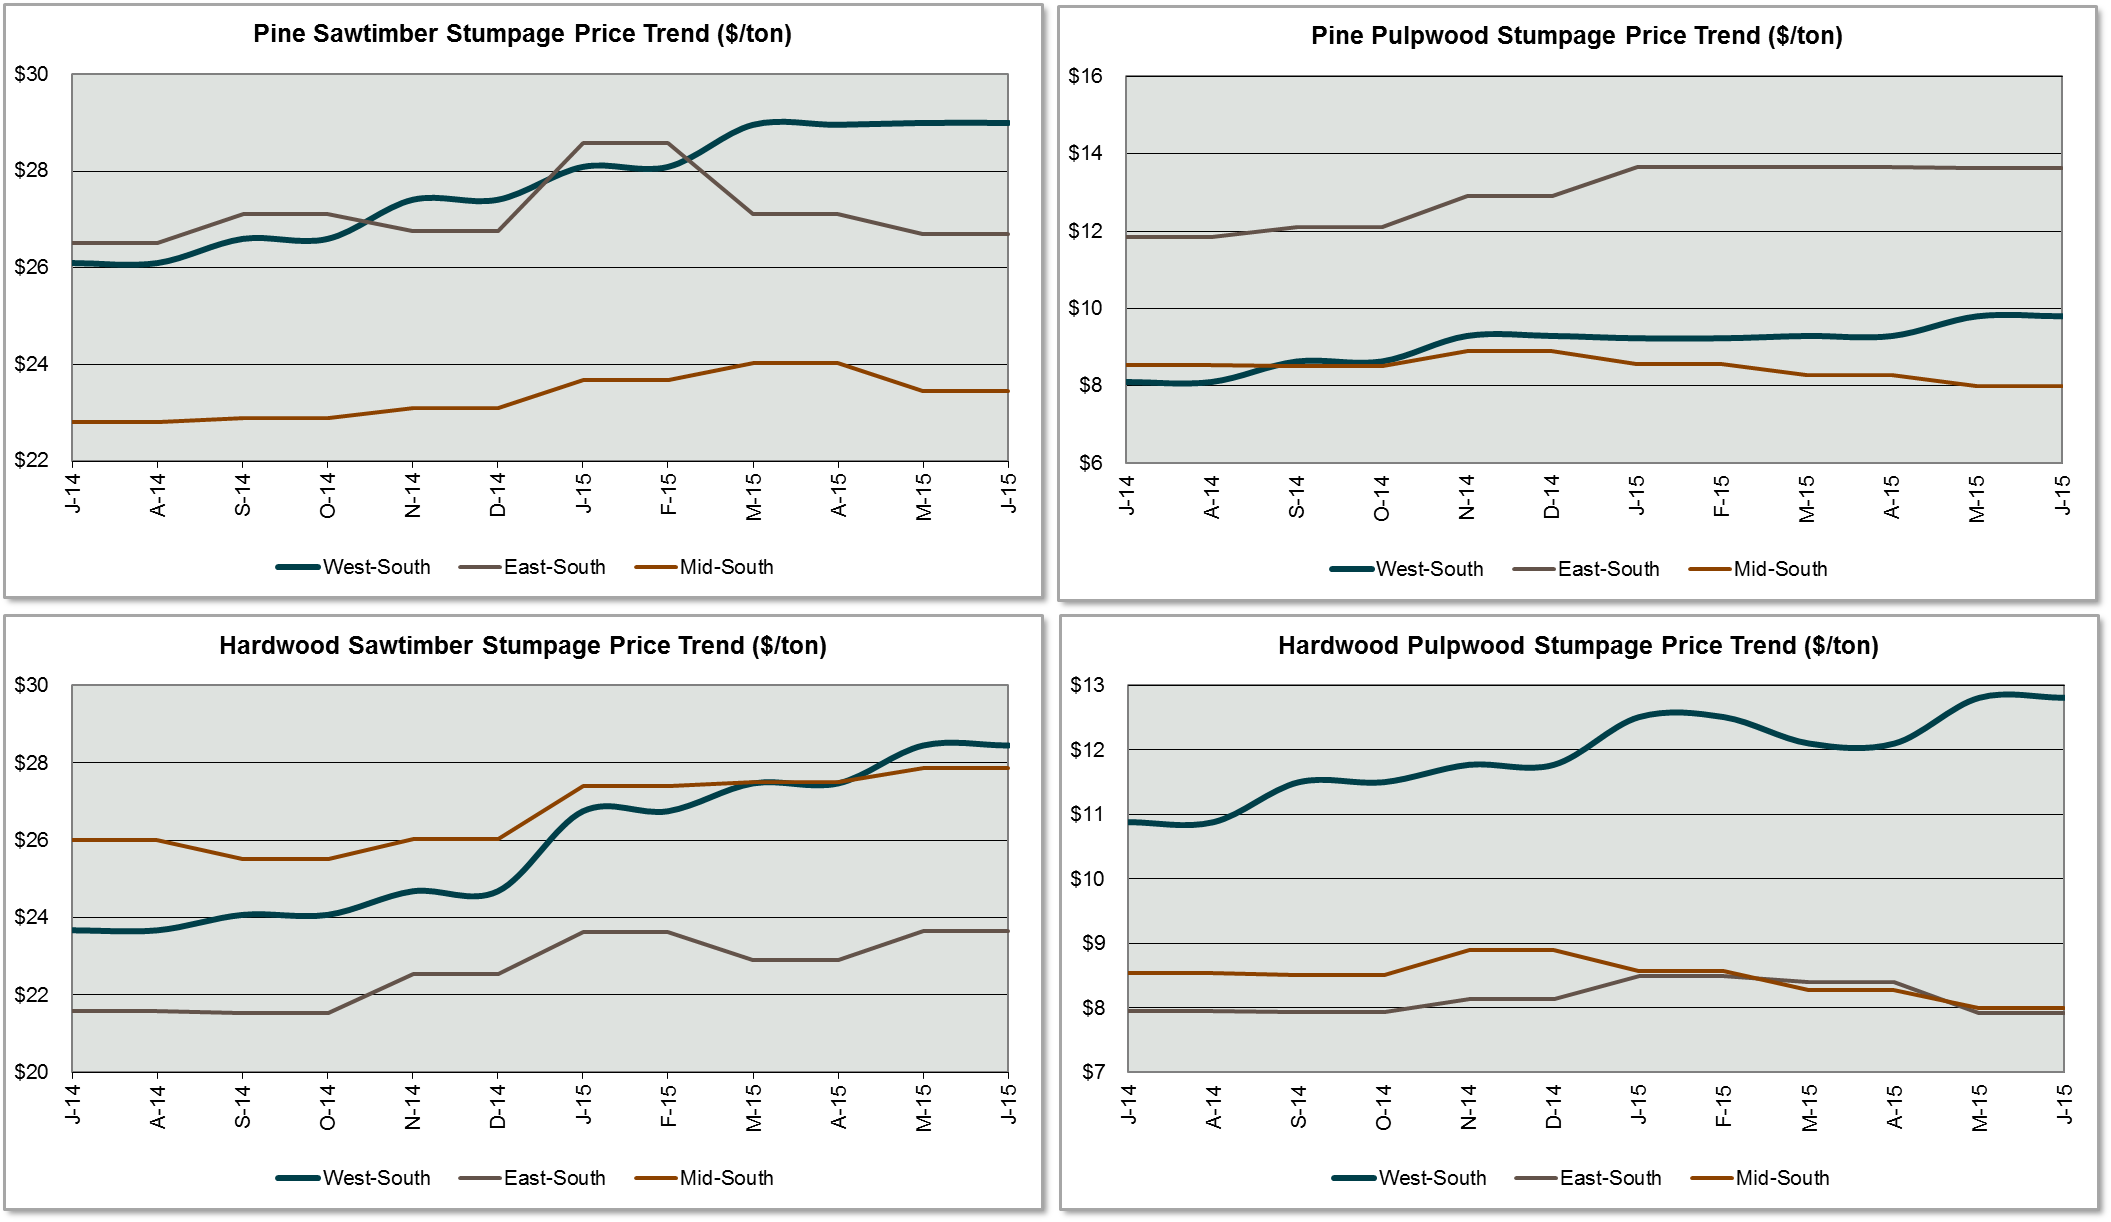 US South Stumpage Price Trends by Region: May/June 2015